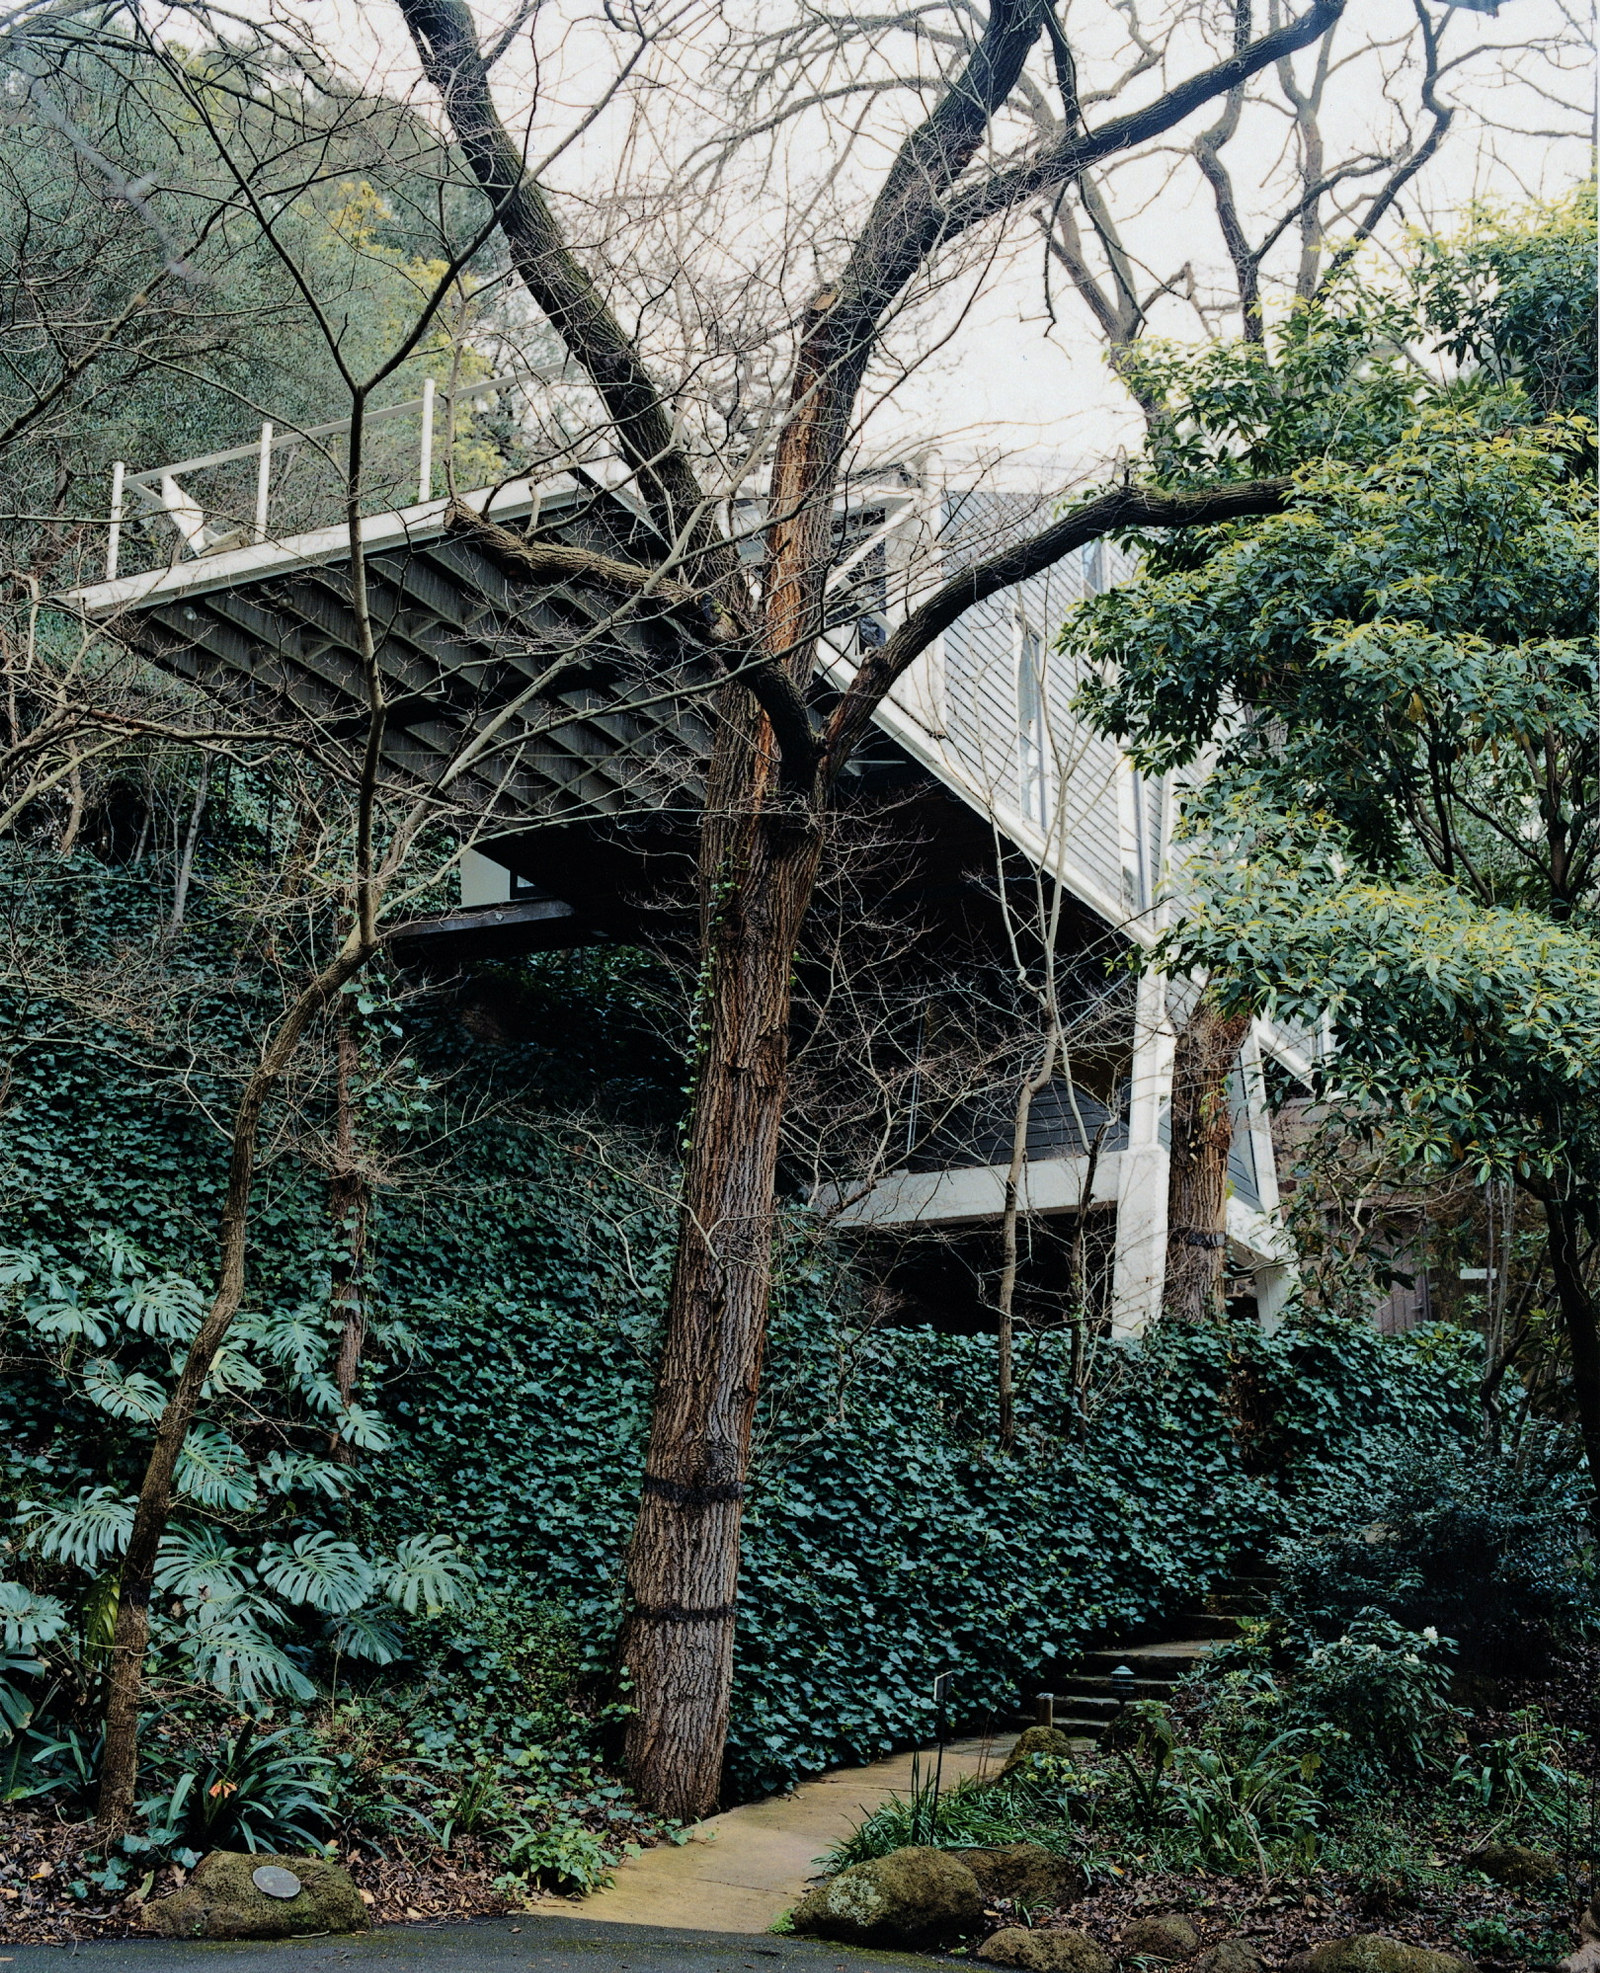 View of the cantilevered balcony of the Butterfly House taken from below